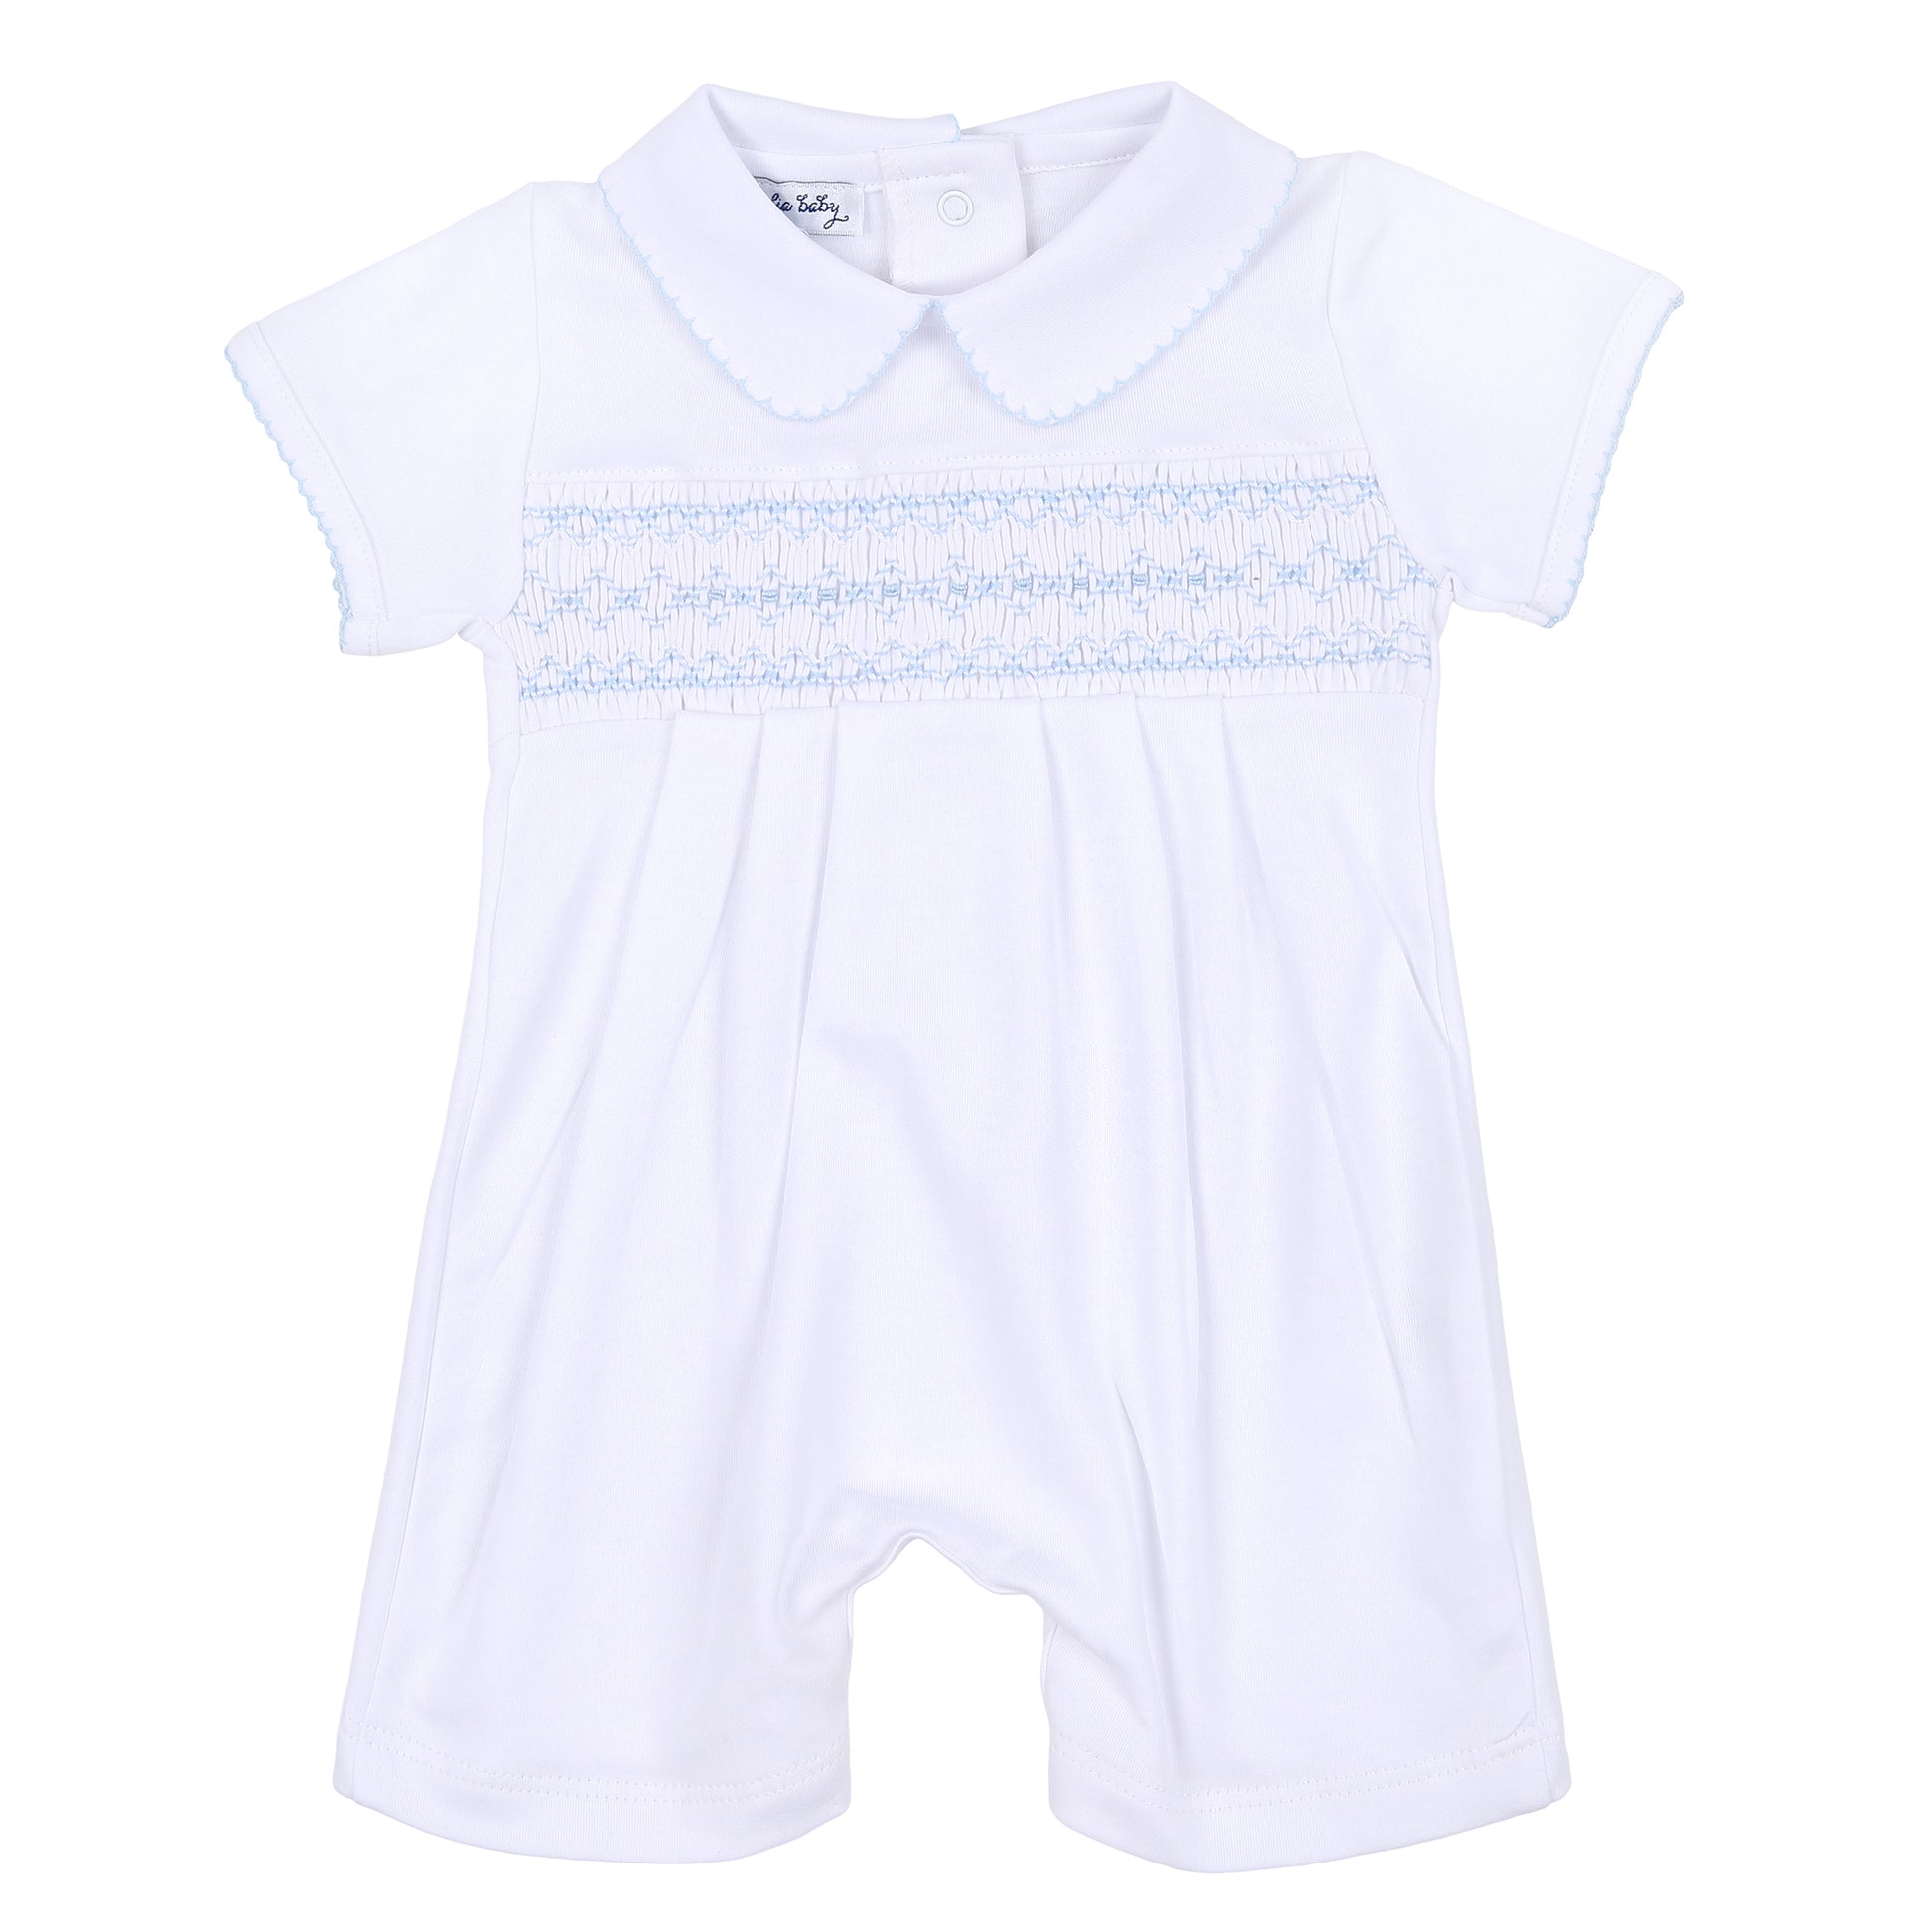 Magnolia BabyMolly and Brody Smocked Collared Short Playsuit - Blue